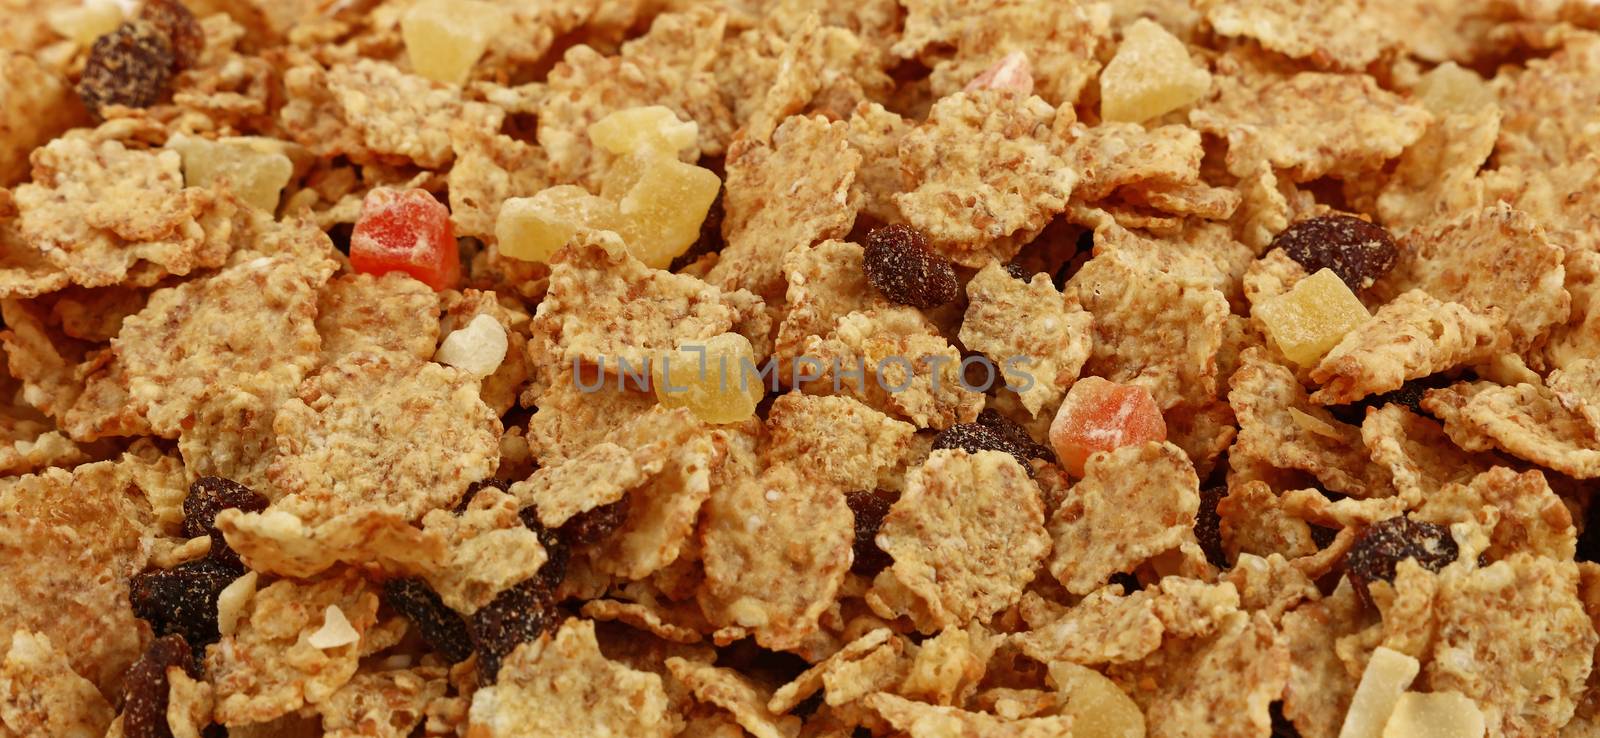 Breakfast granola muesli with dried fruits close up pattern background, low angle view, selective focus